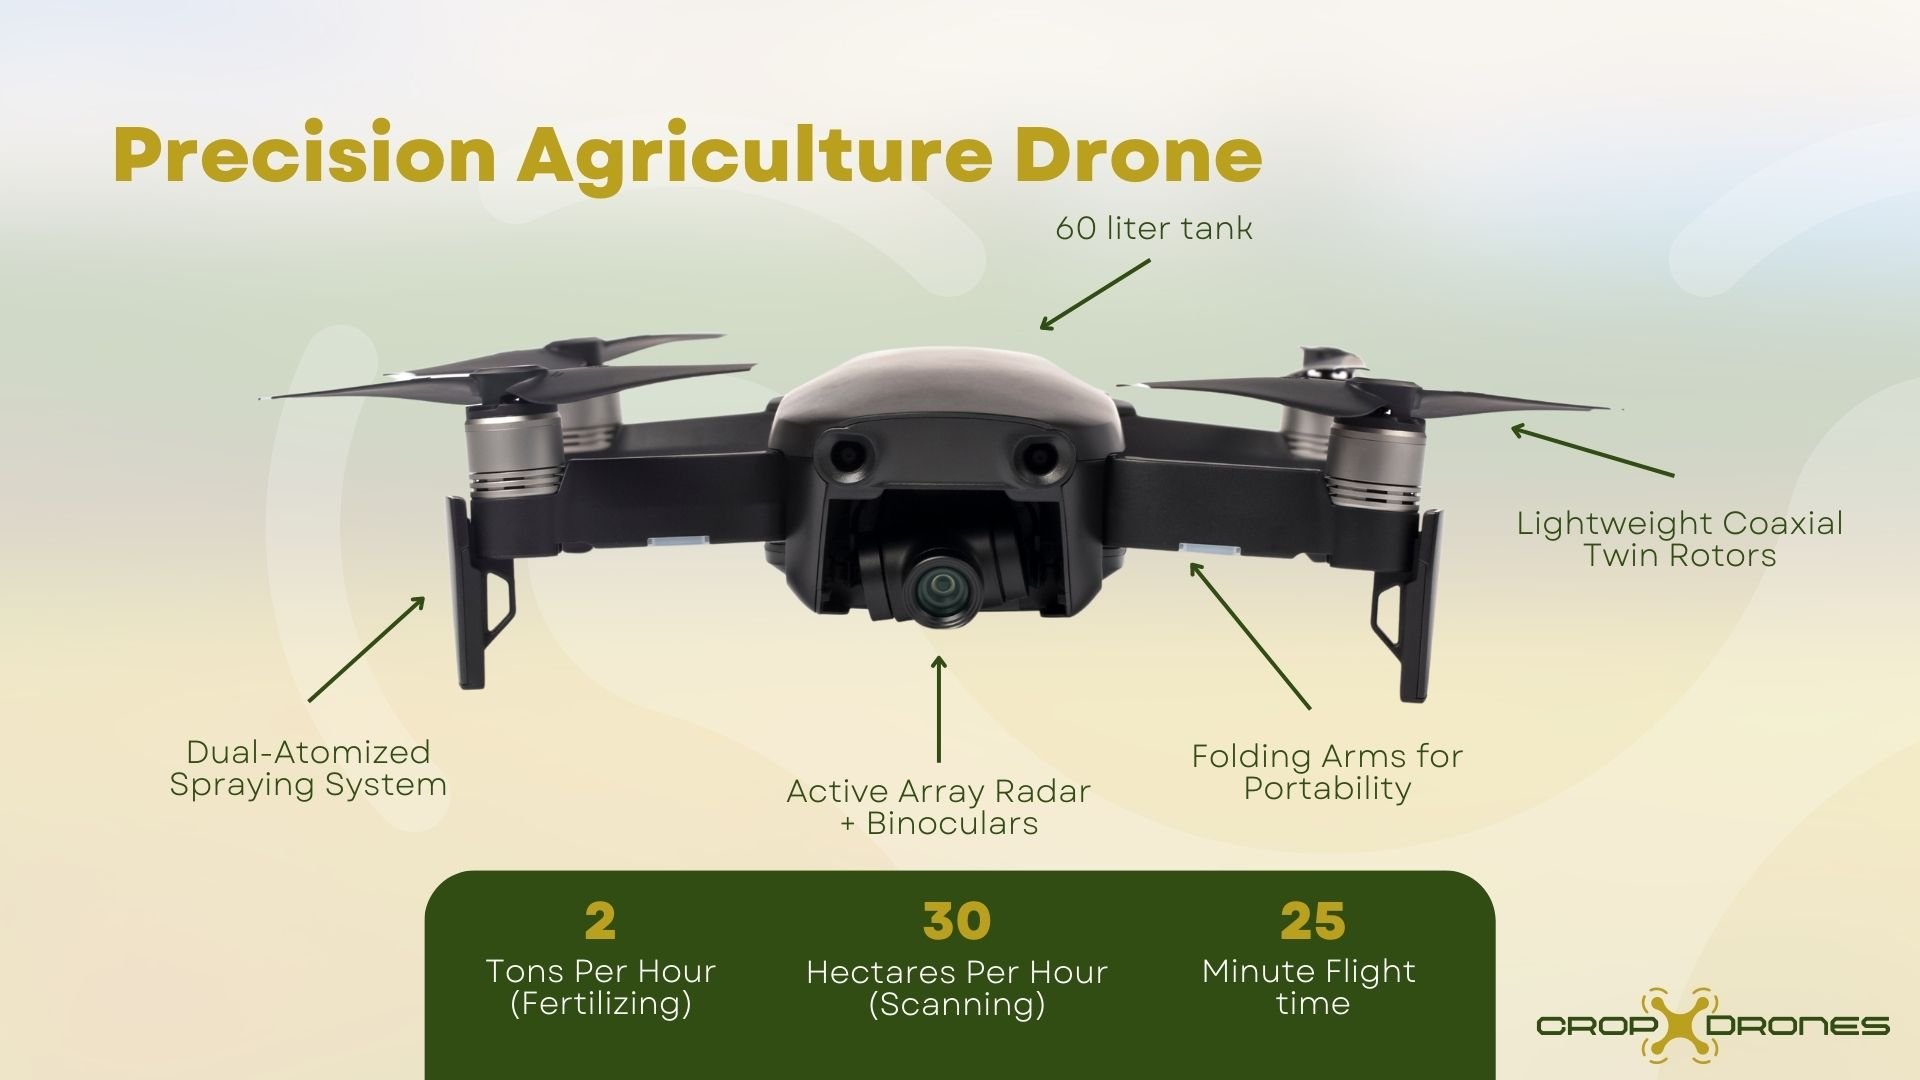 Features Section of Pitch Deck: CropDrones - Product Photo Schematic